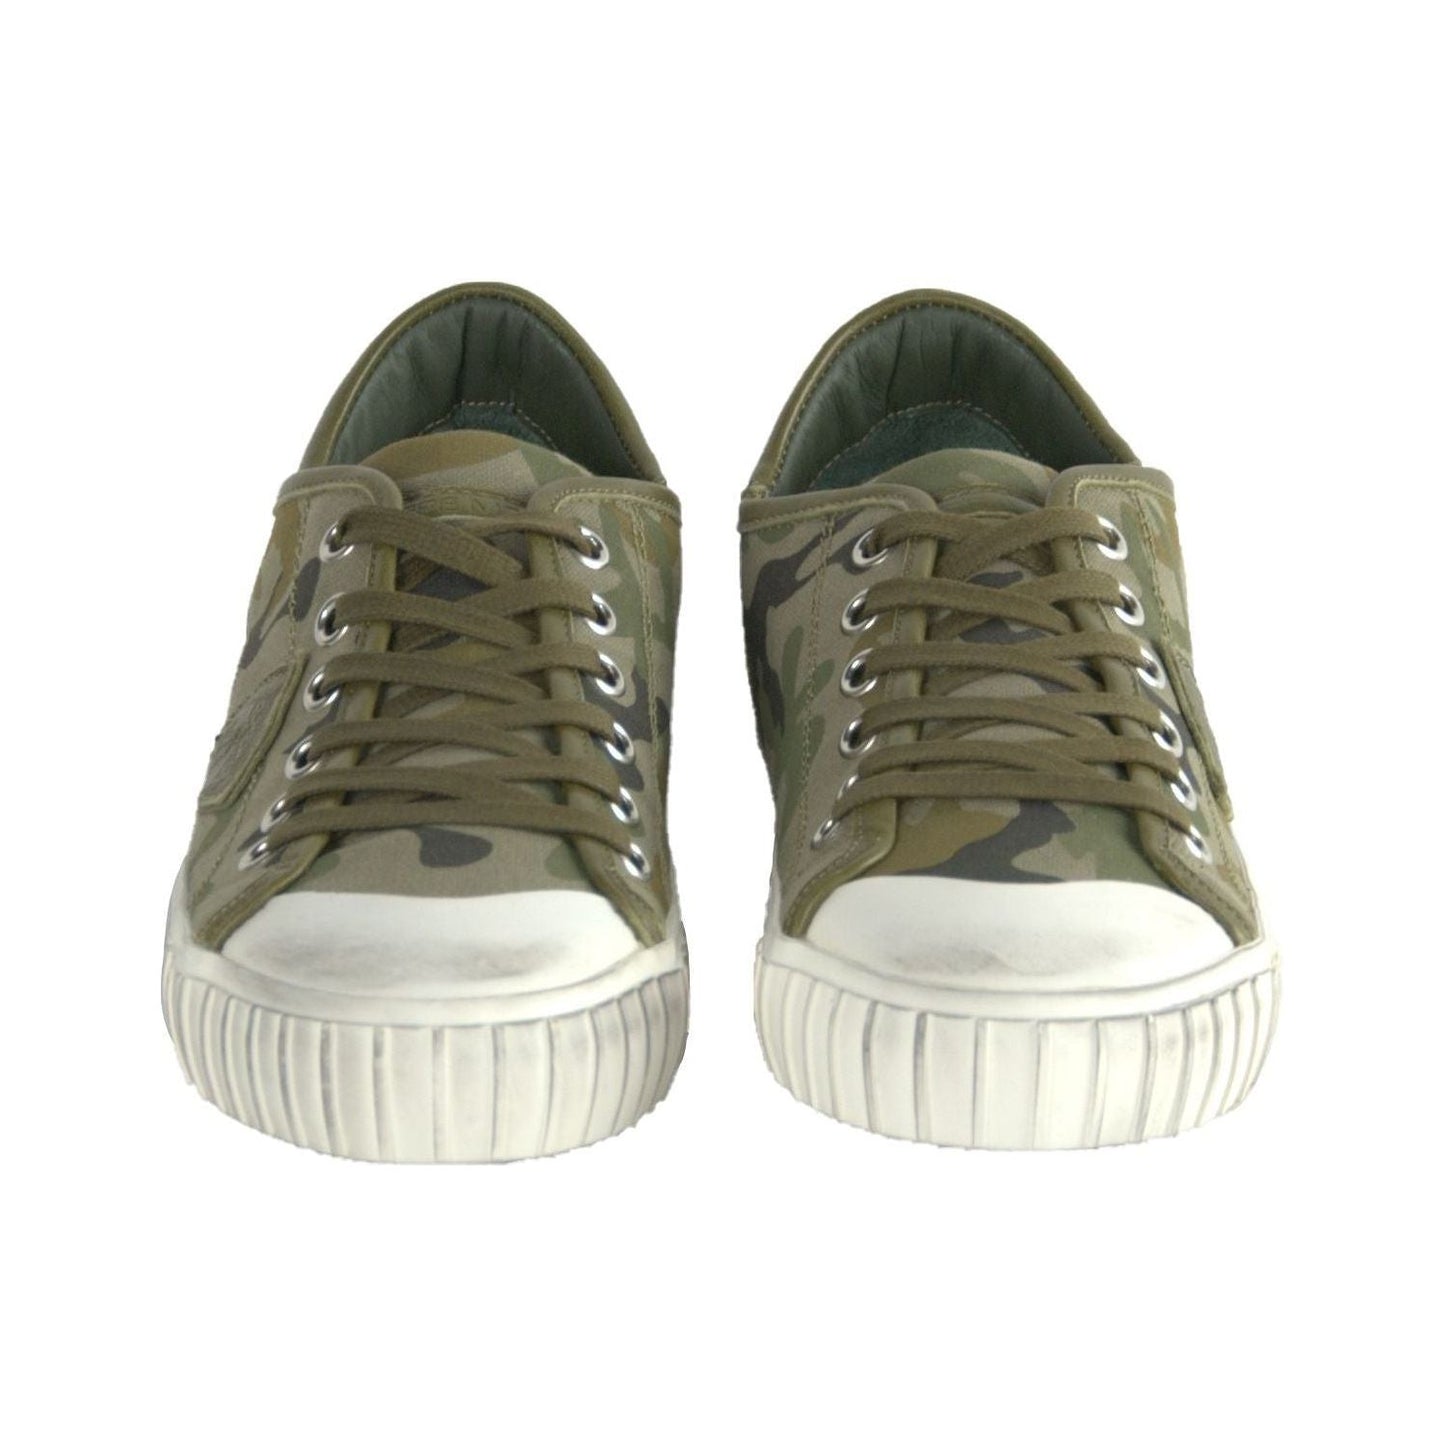 Philippe Model Gare L U Bandes Camou Vert Leather Sneakers green-leather-sneakers-7 stock_product_image_1845_1399153342-10be0cd0-c60.jpg